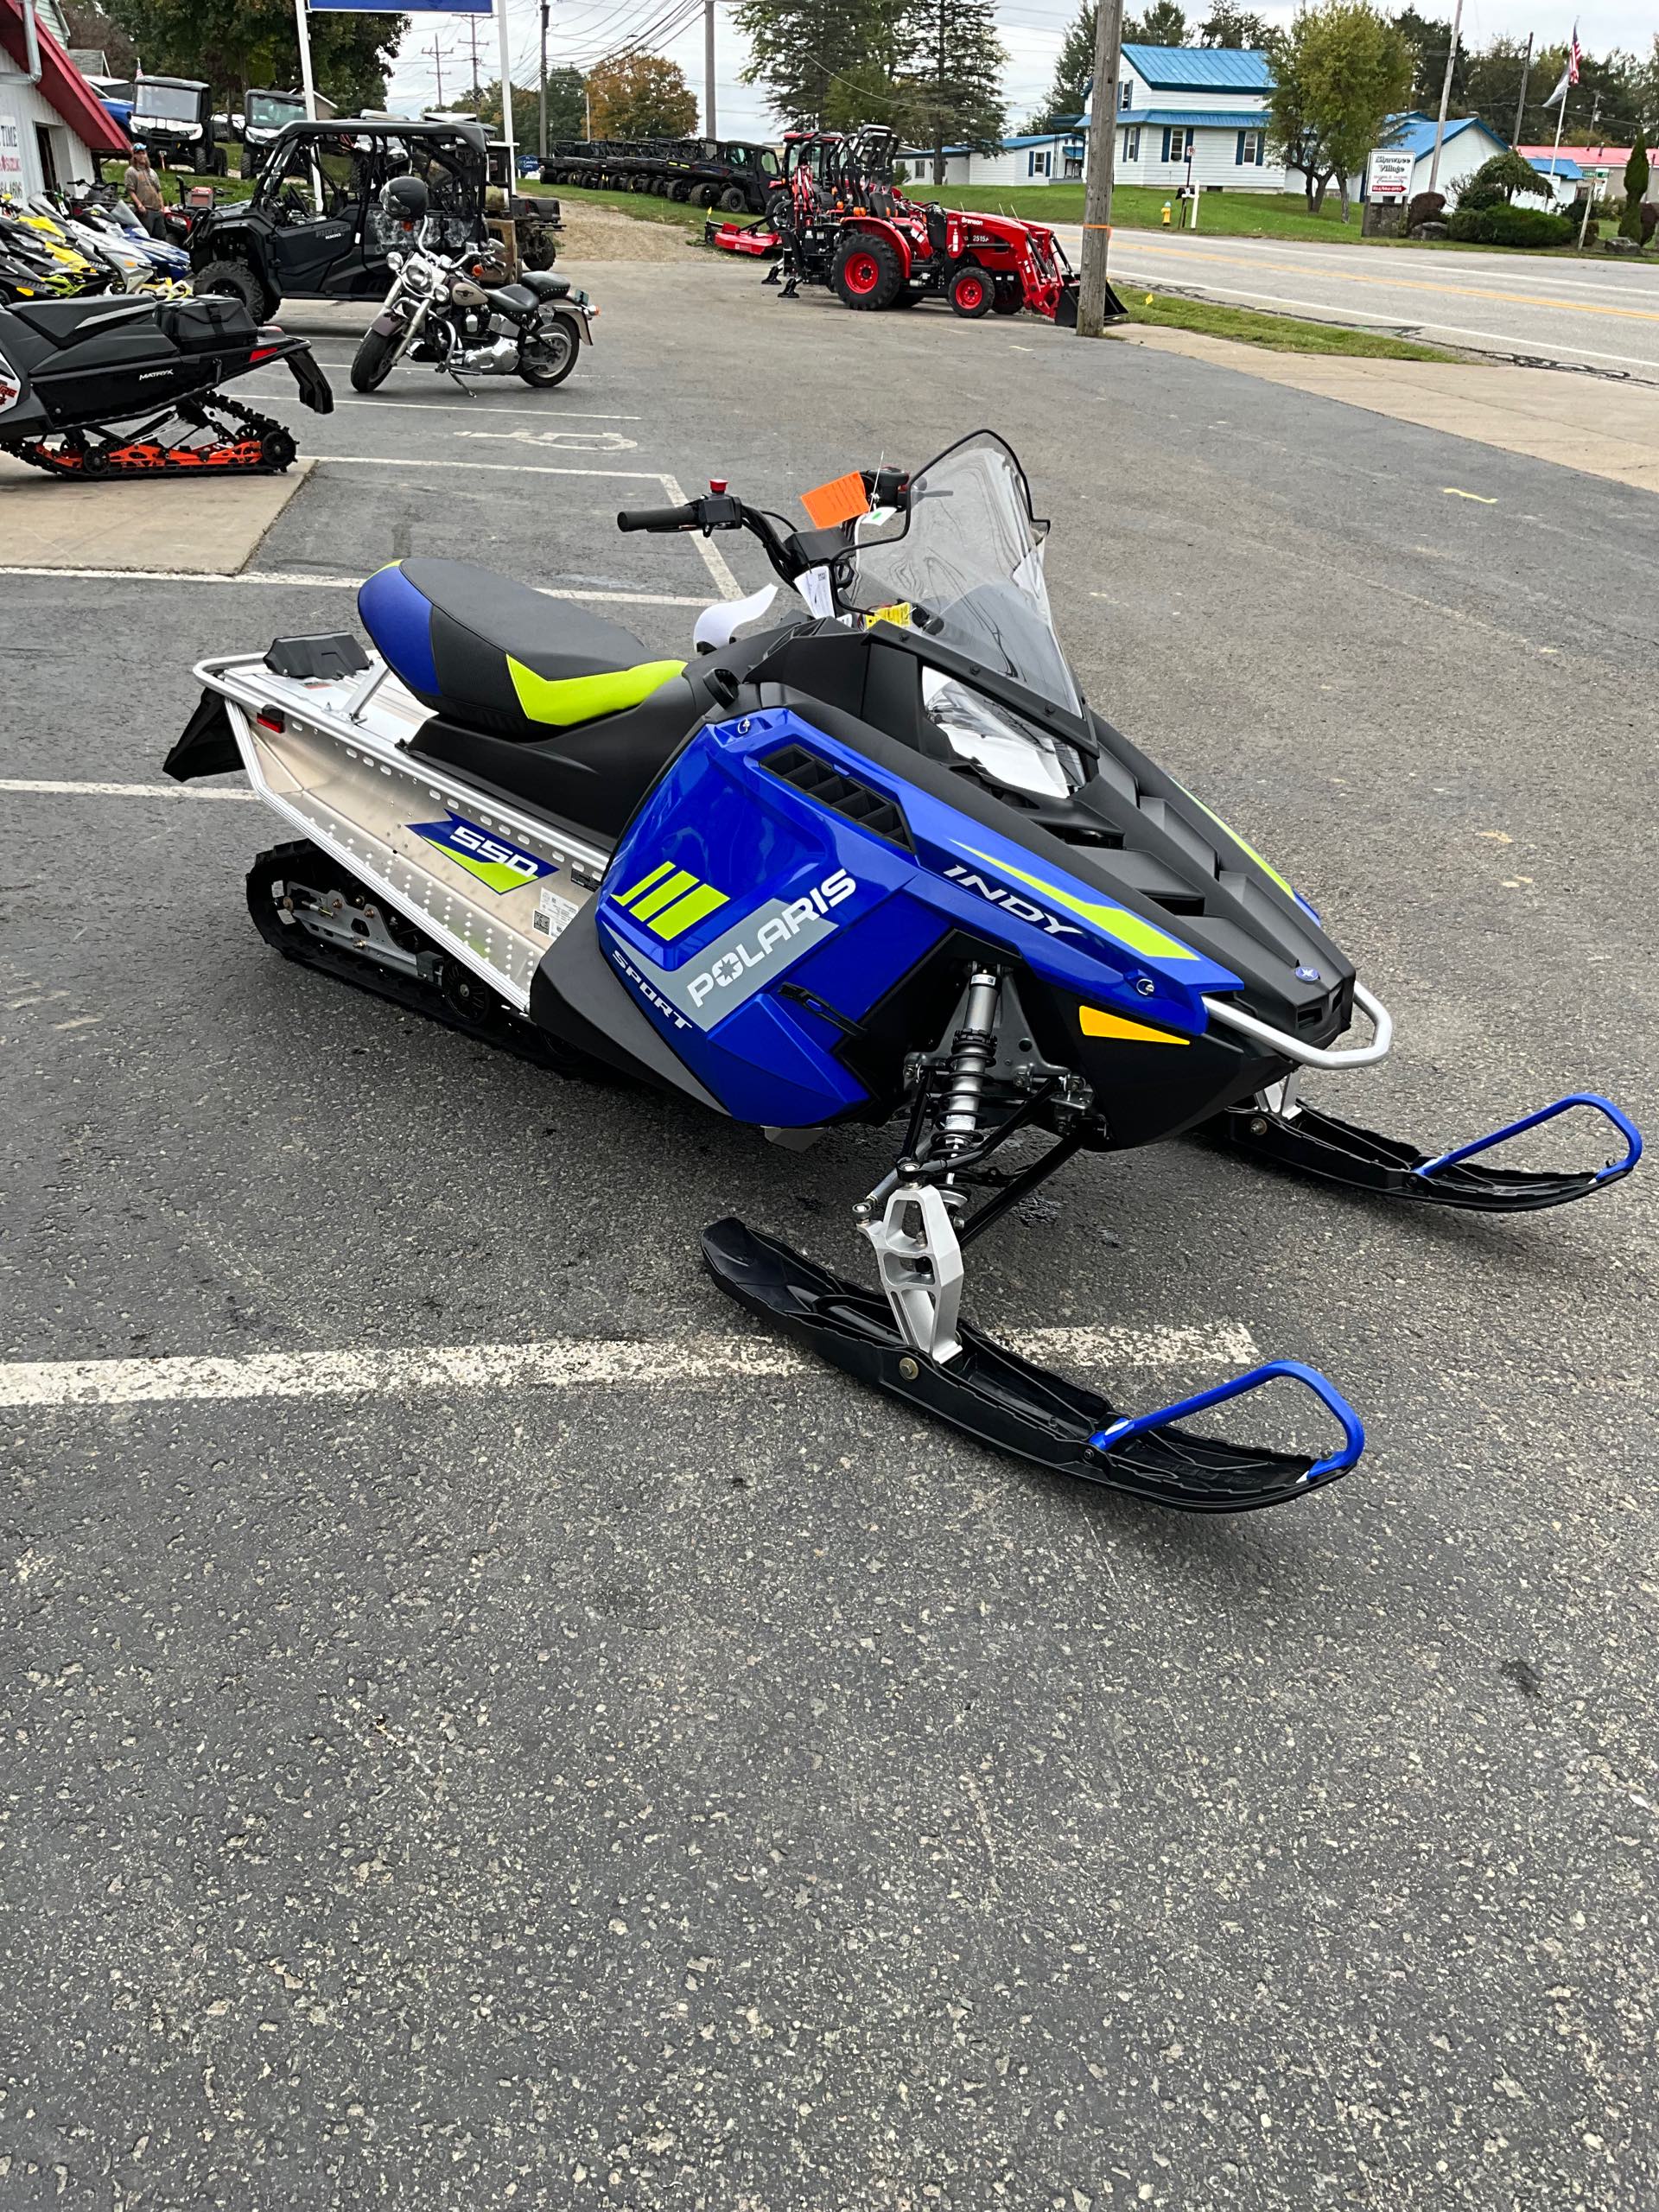 2024 Polaris INDY Sport 550 121 at Leisure Time Powersports of Corry